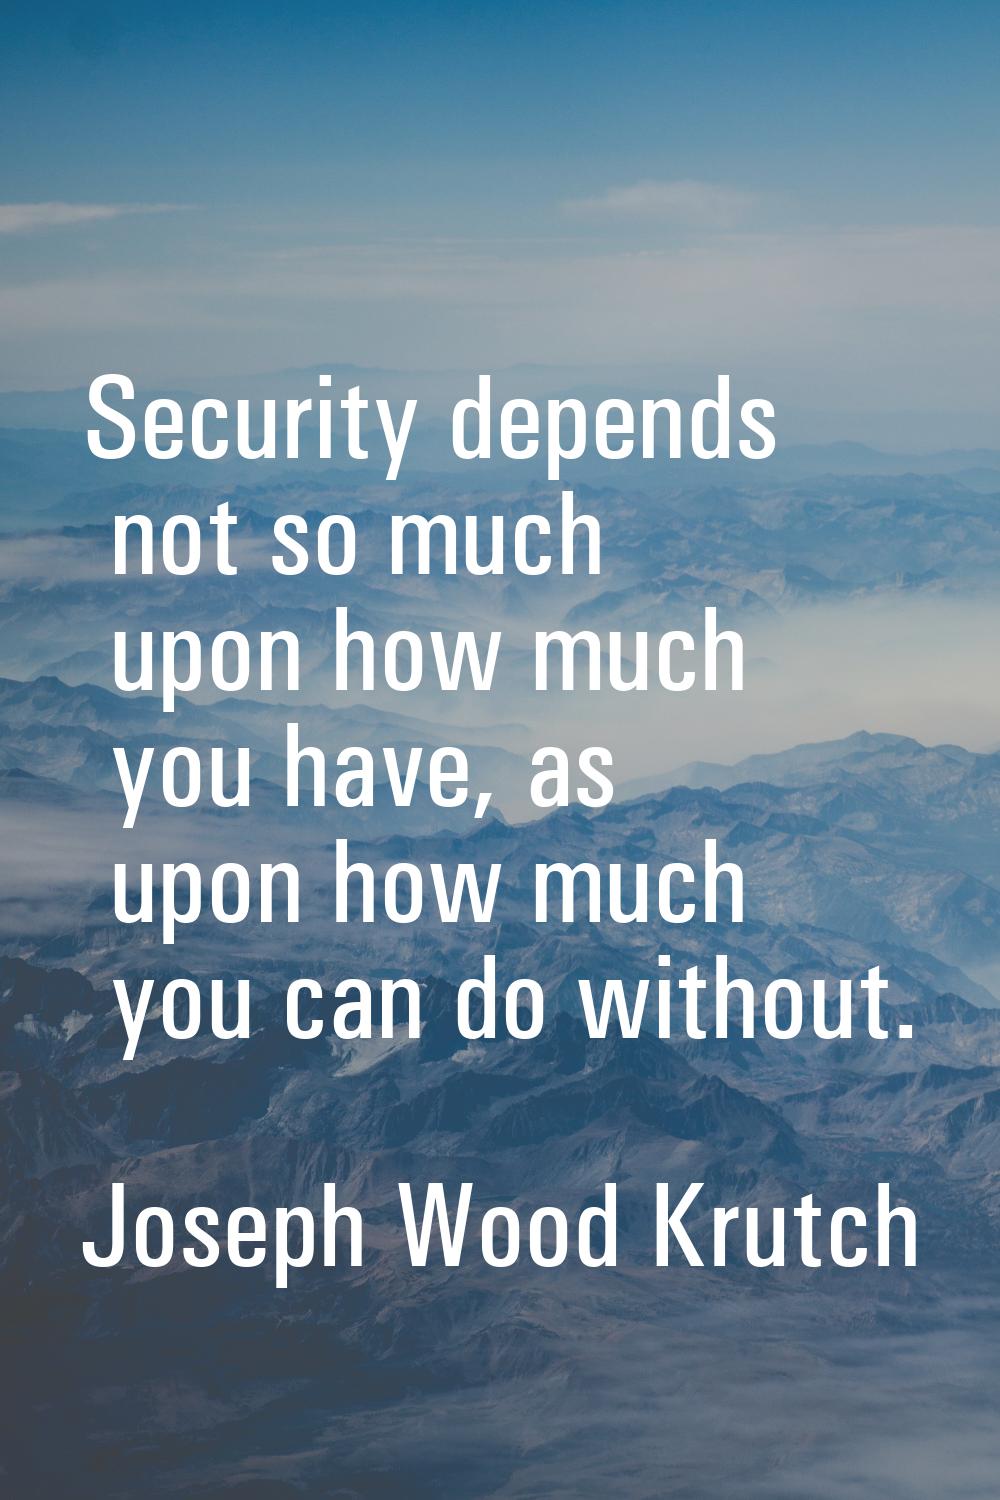 Security depends not so much upon how much you have, as upon how much you can do without.